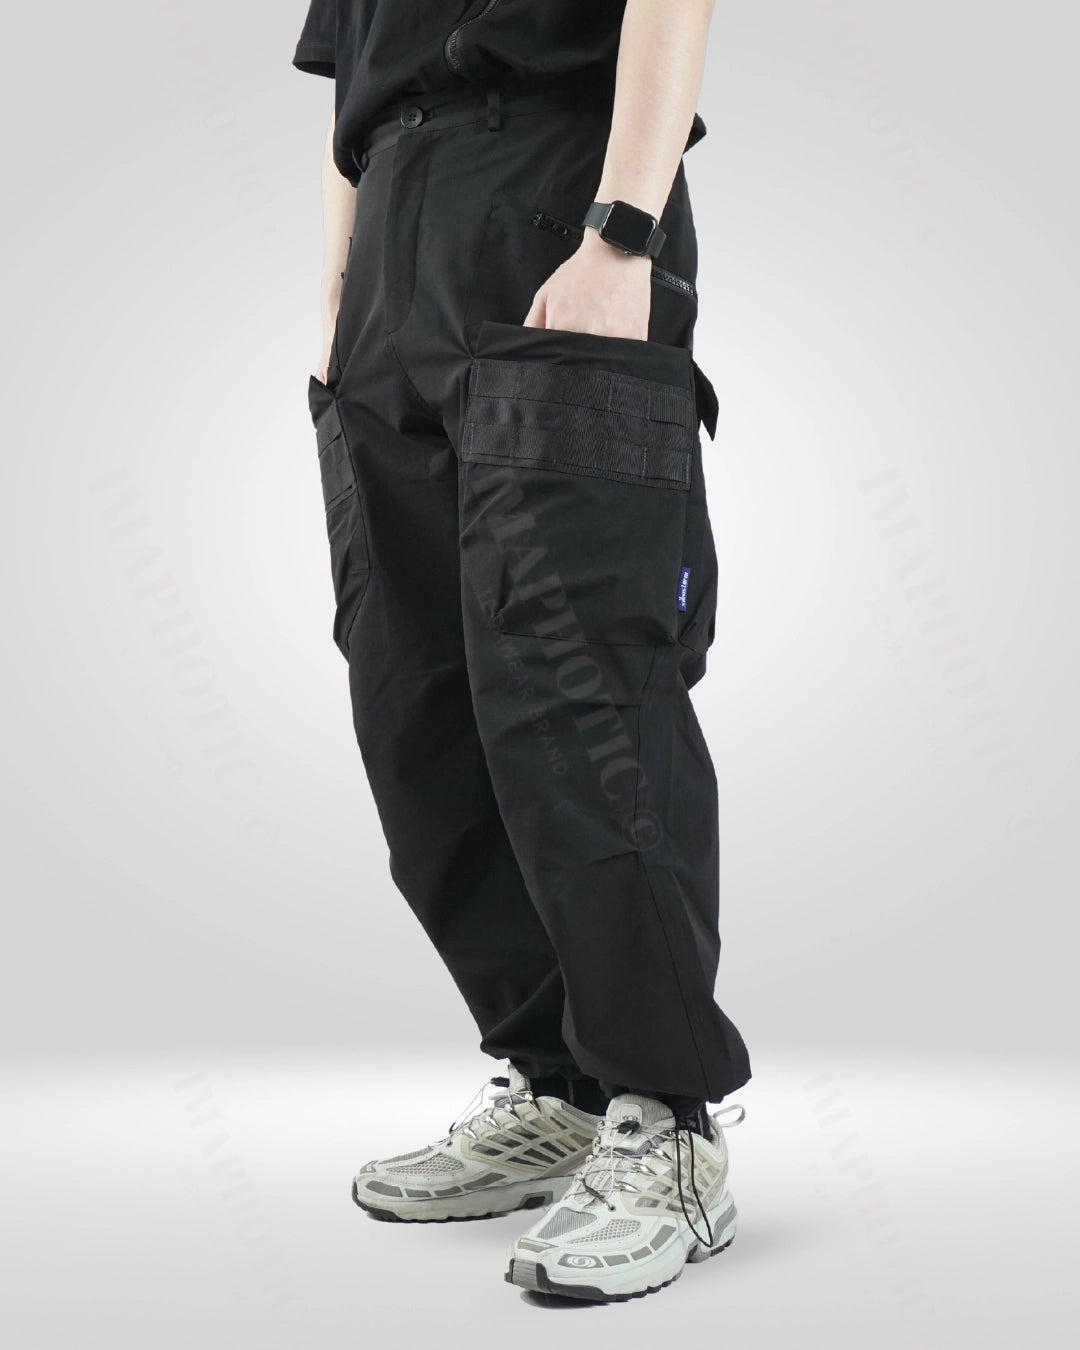 Durable & Functional Nylon-Spandex MOLLE Loose Cargo Pants for Men